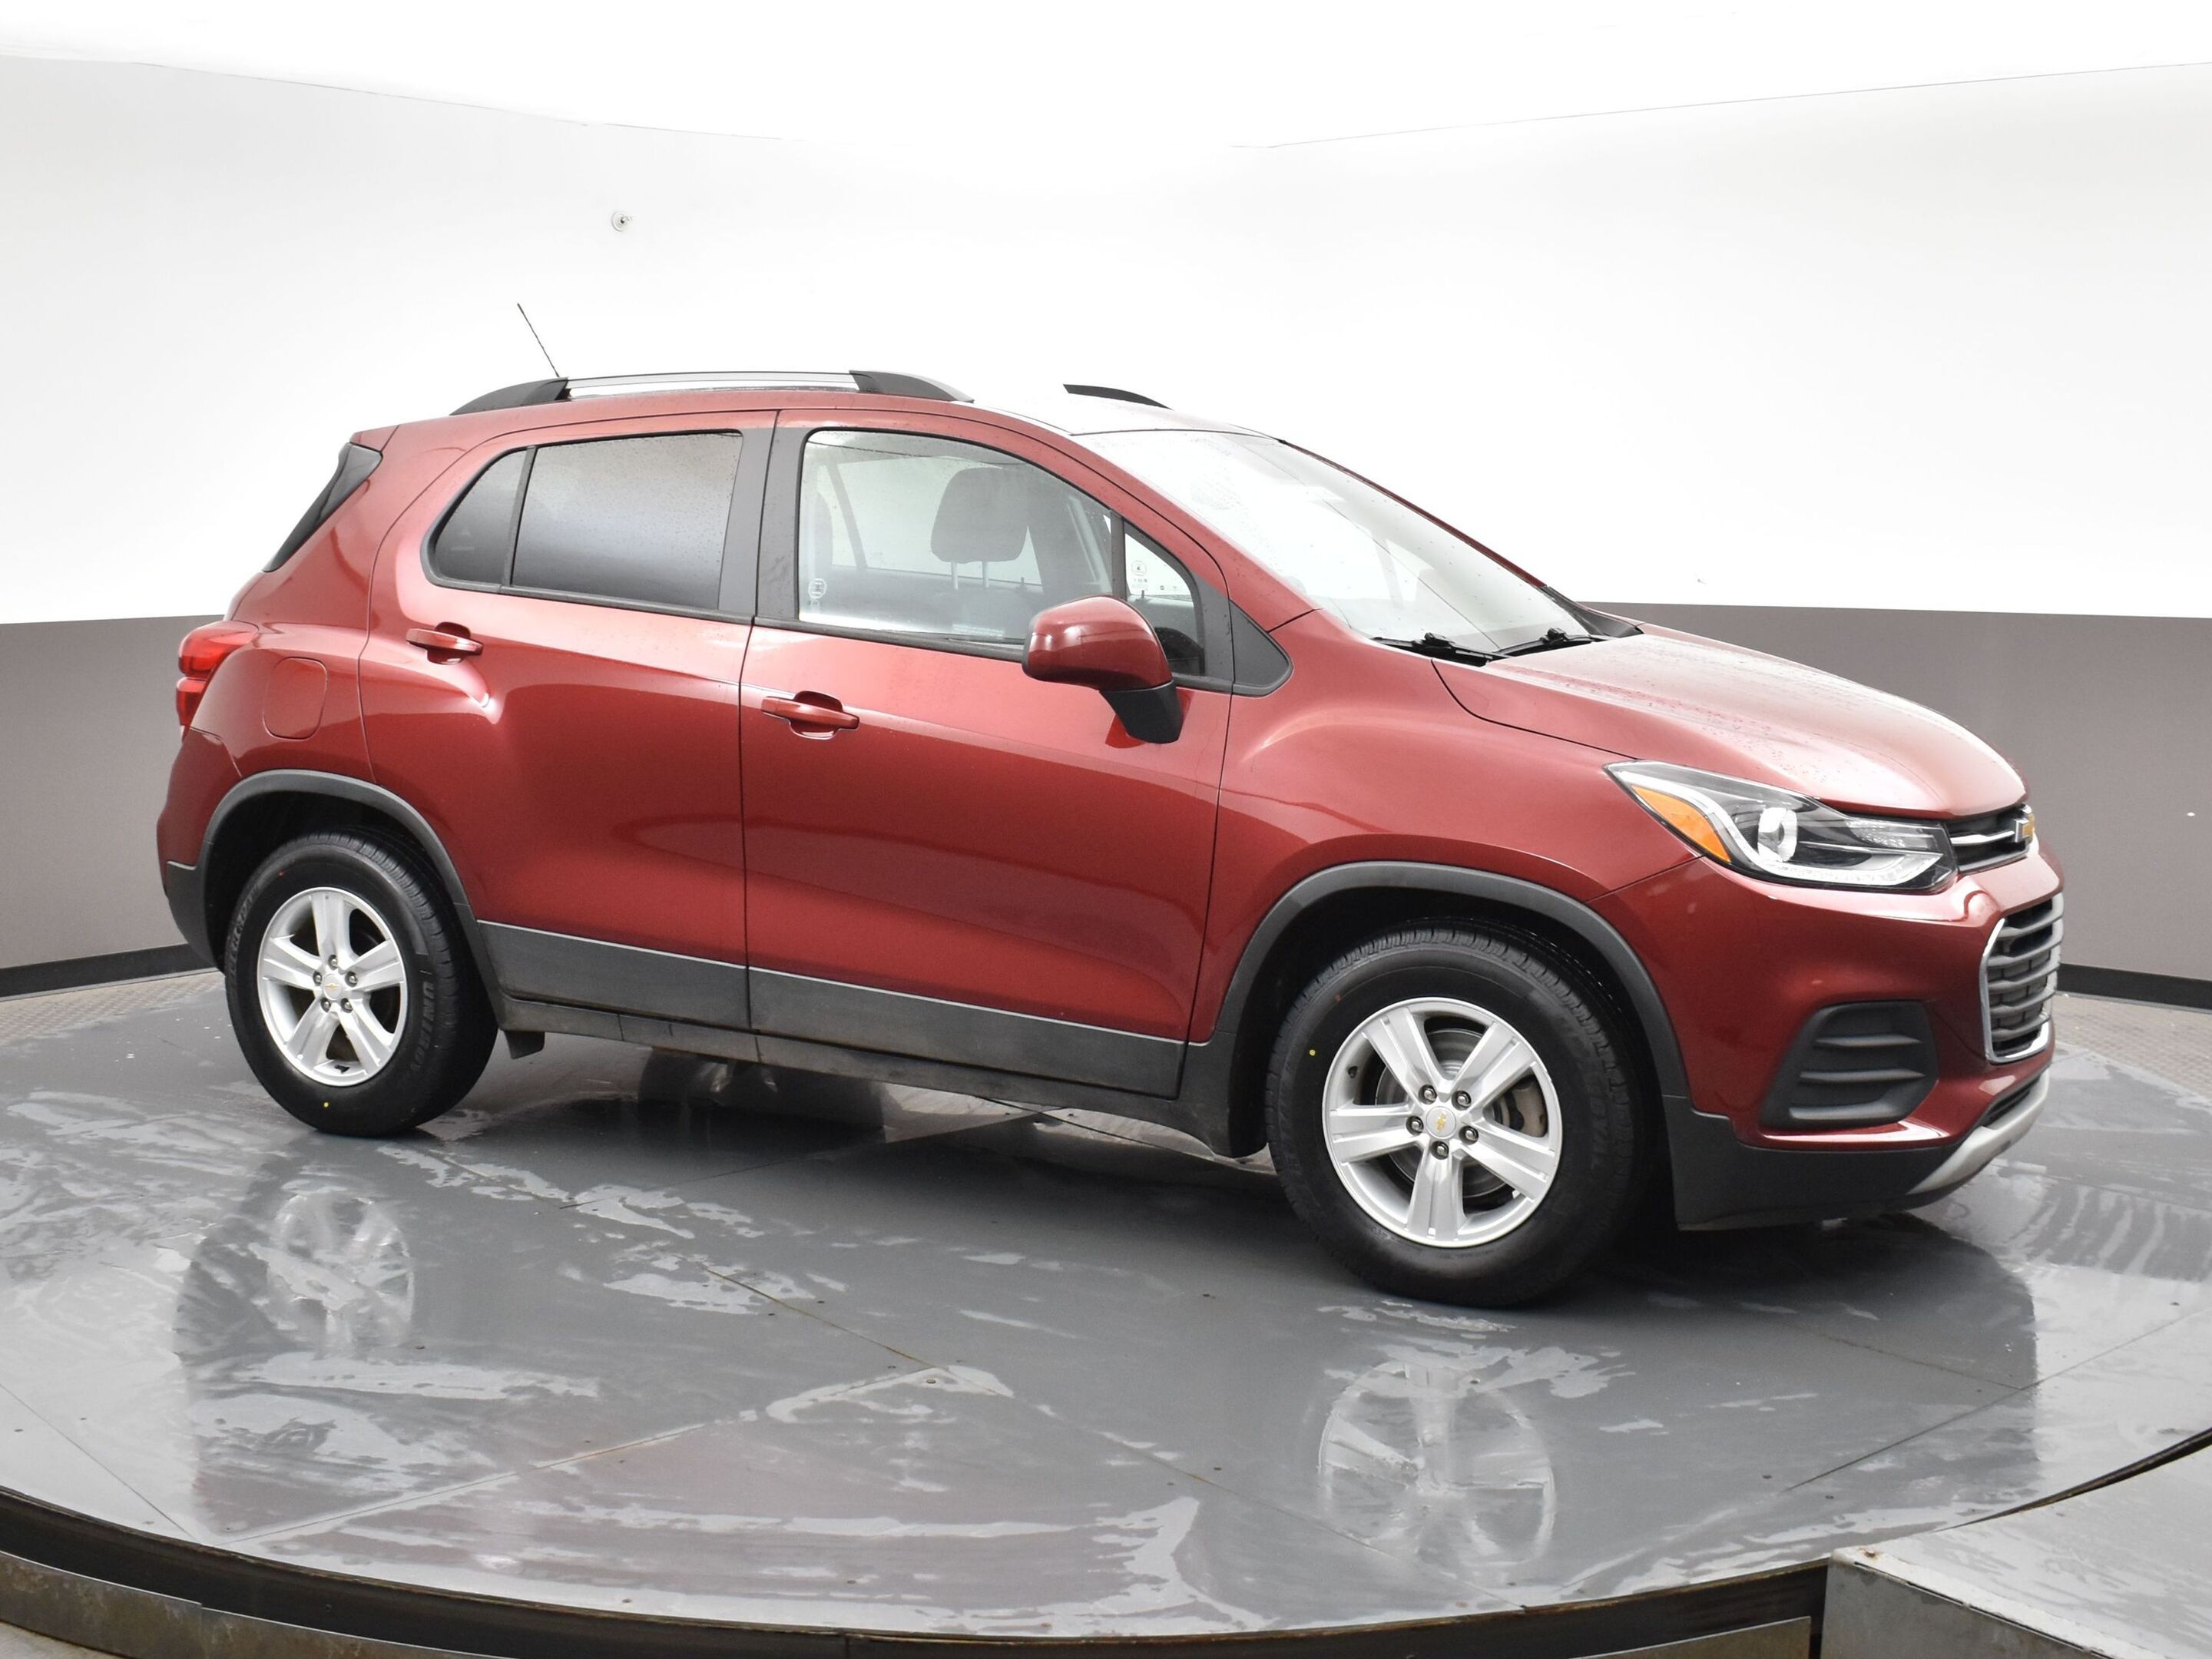 2021 Chevrolet Trax LT Leasing options available!! Apple Carplay, Andr